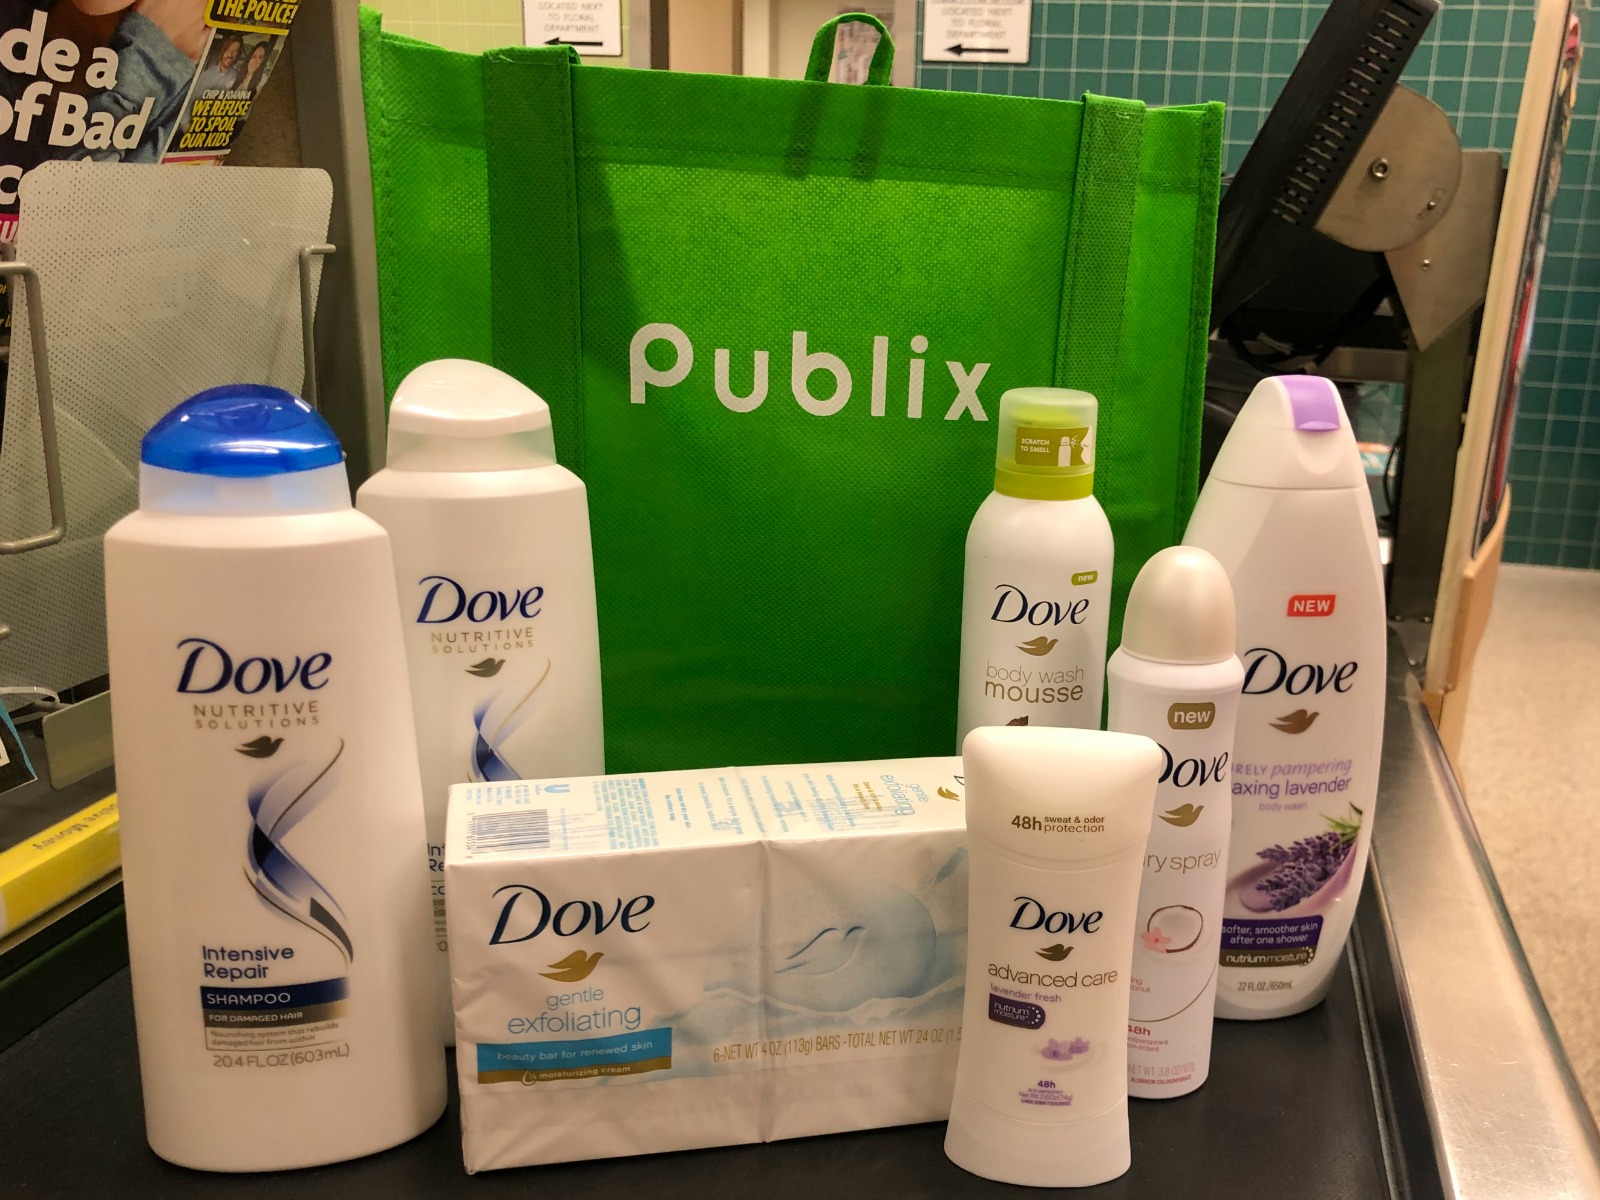 Join Dove To Build Self-Esteem & Save Big At Your Local Publix